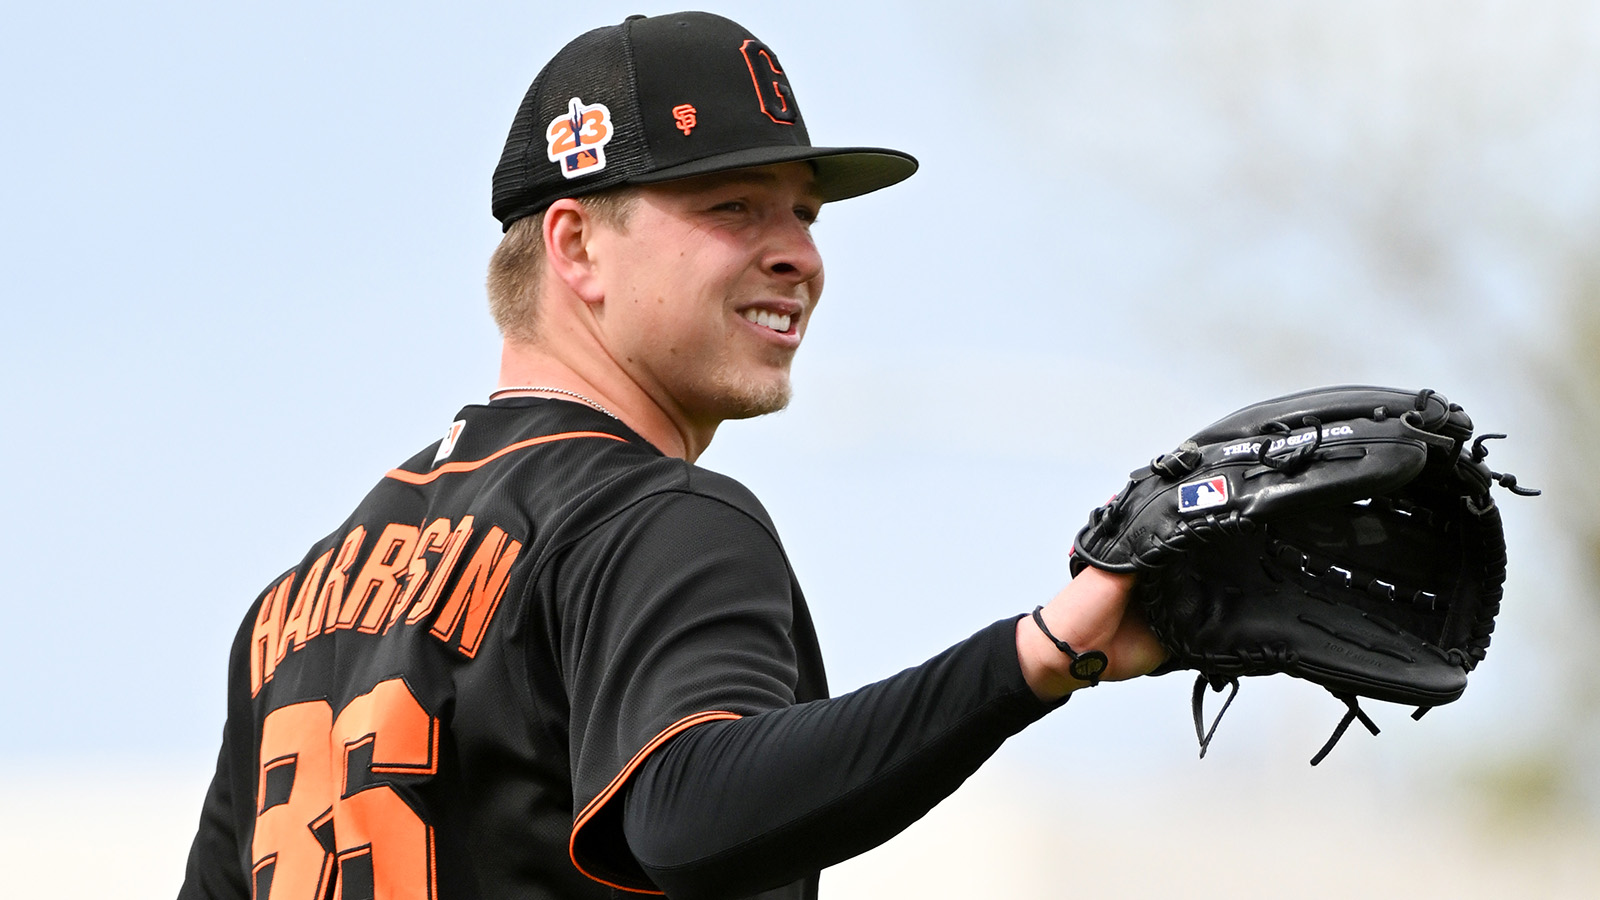 San Francisco Giants - The City Connect uniforms work their magic